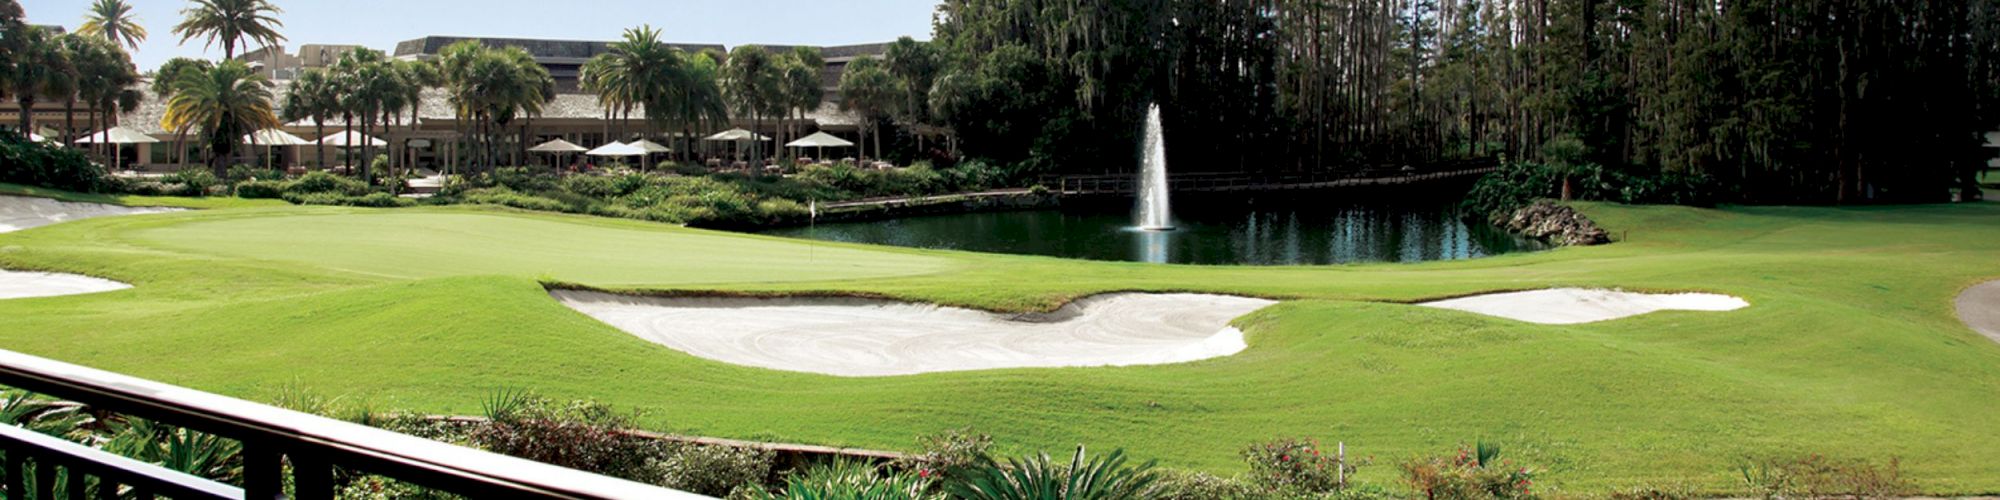 A well-manicured golf course featuring sand traps, a water hazard with a fountain, and a clubhouse surrounded by palm trees and lush vegetation.